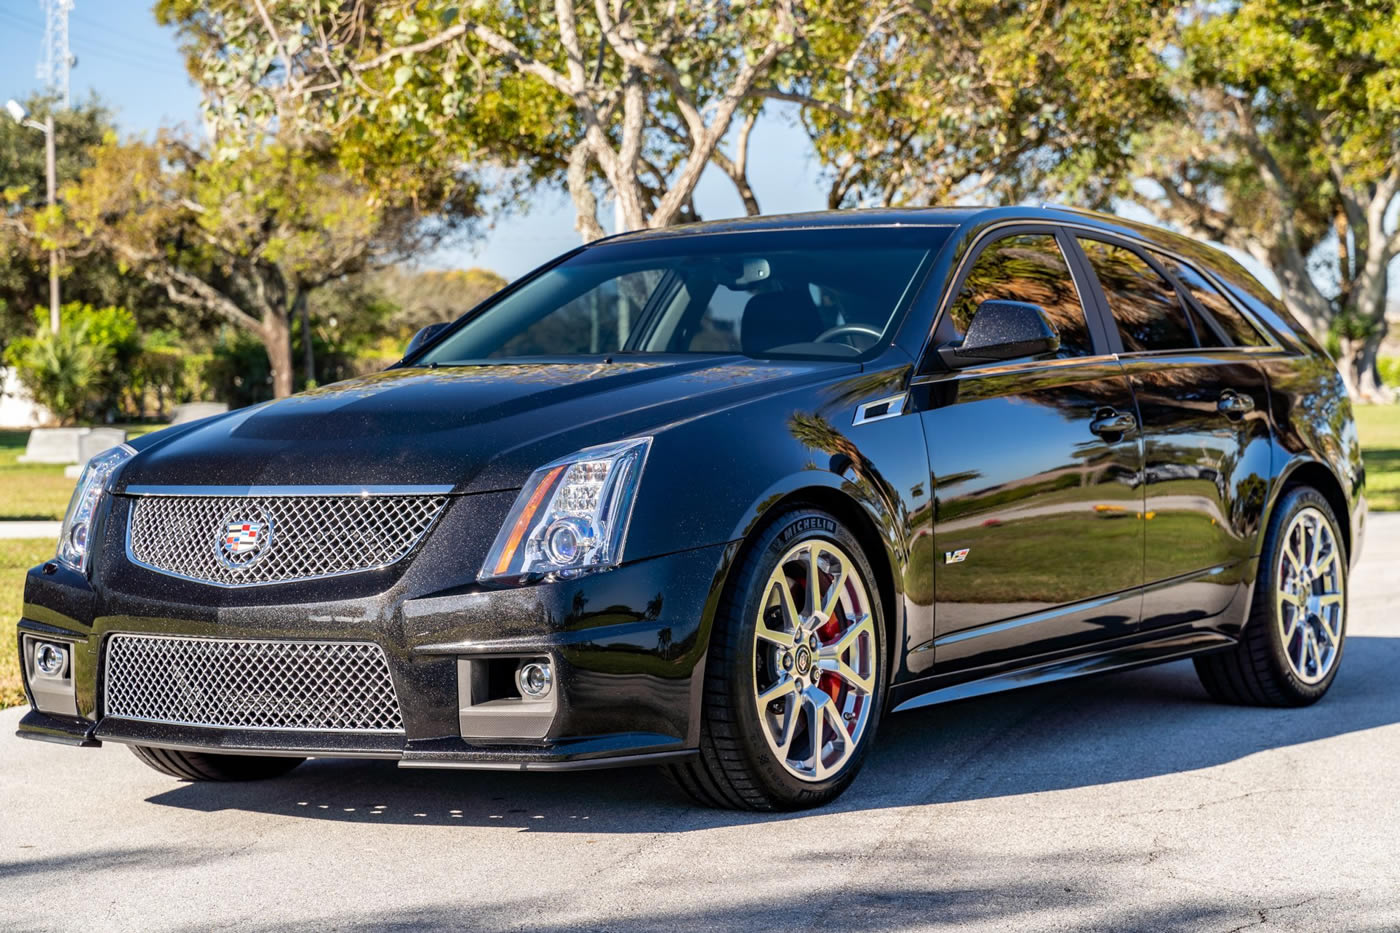 For Sale - 2014 Cadillac CTS-V Wagon in Black Diamond Tricoat with 15K